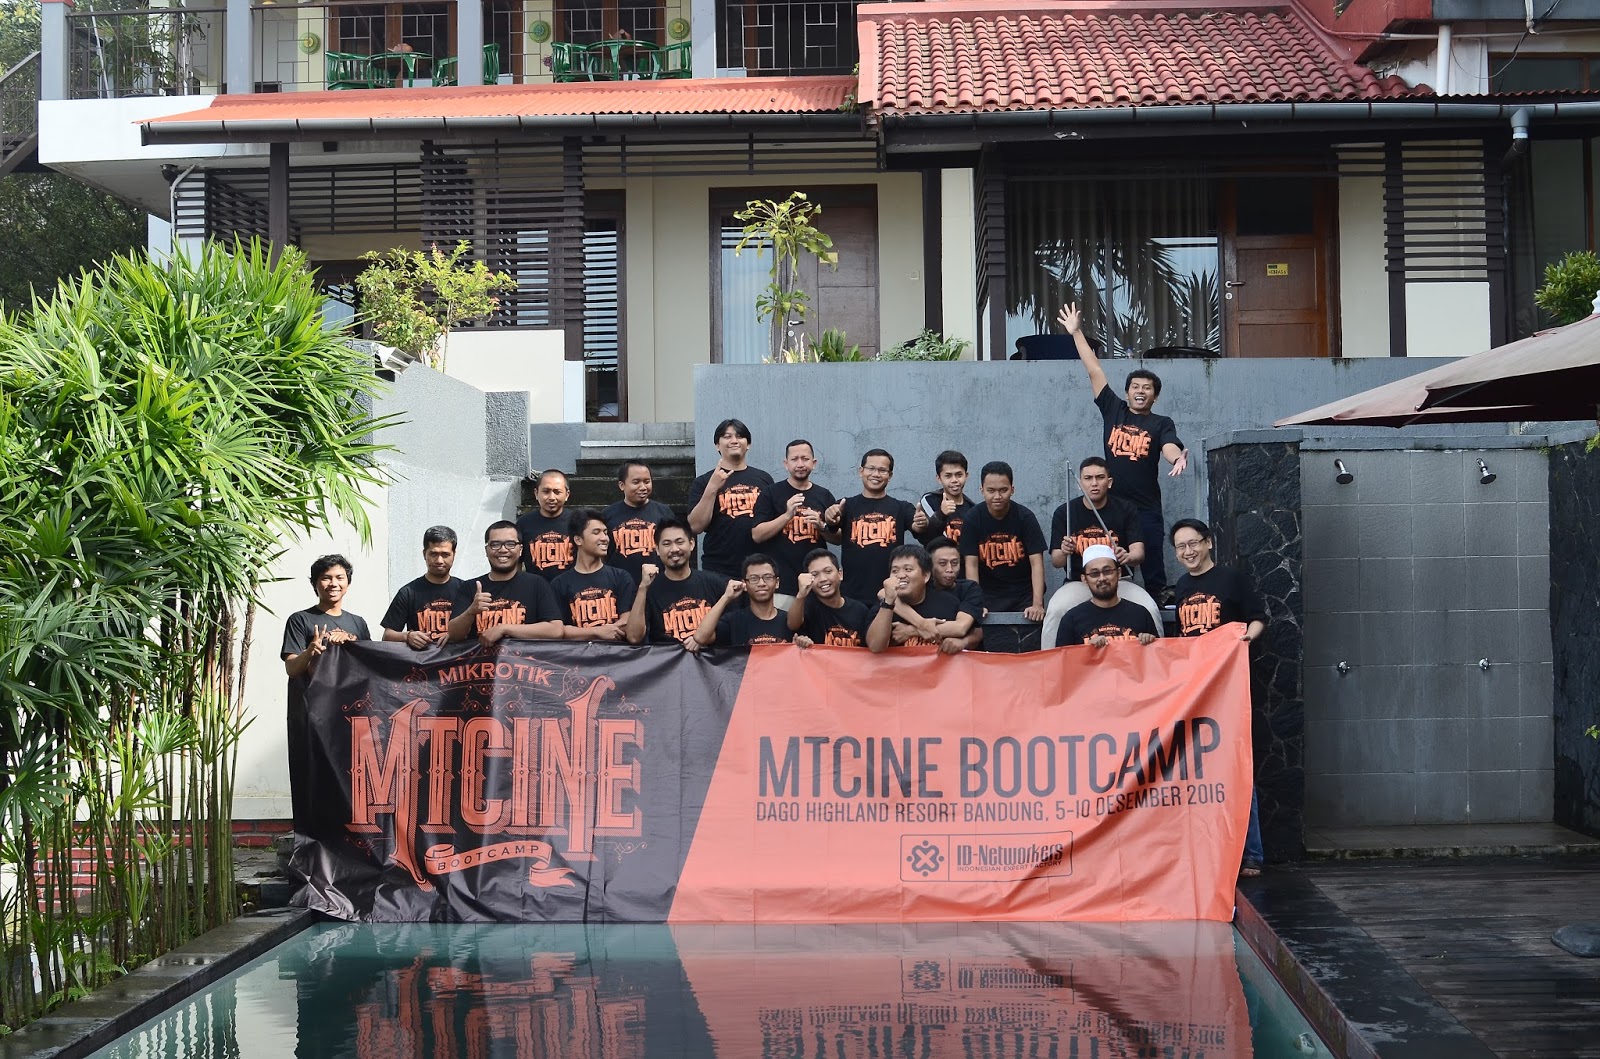 MTCINE Bootcamp ID-Networkers